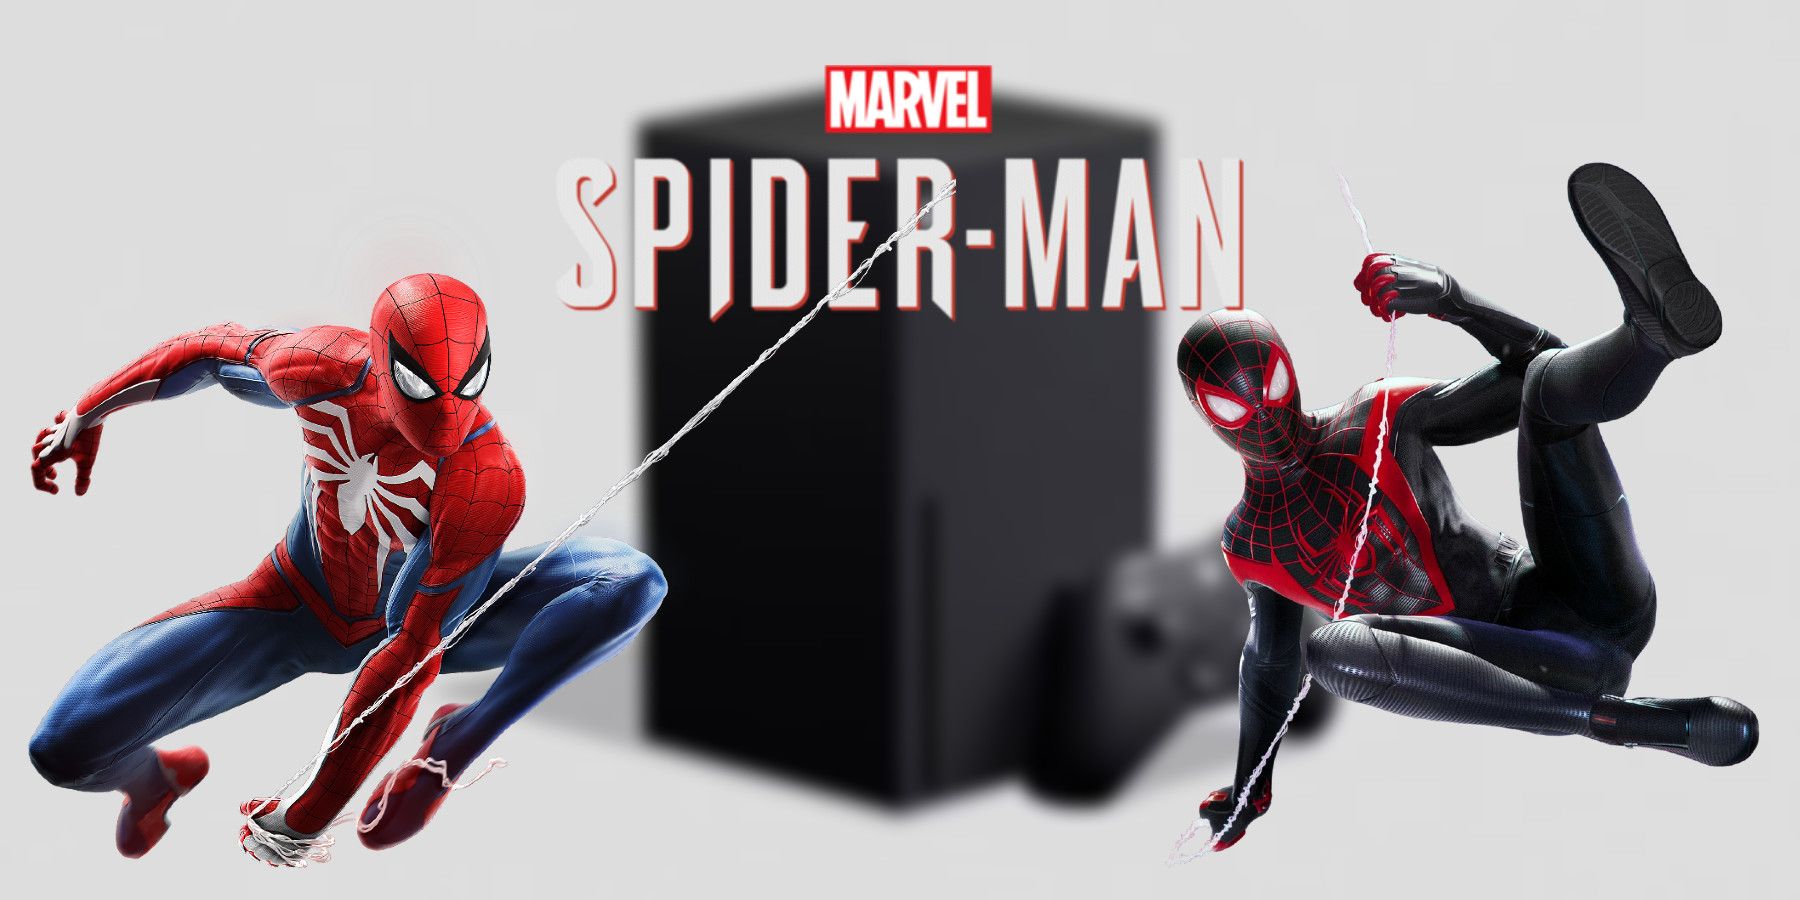 Marvel's Spider-Man 2 platforms: Is it coming to PS4, PC, or Xbox? - Dexerto